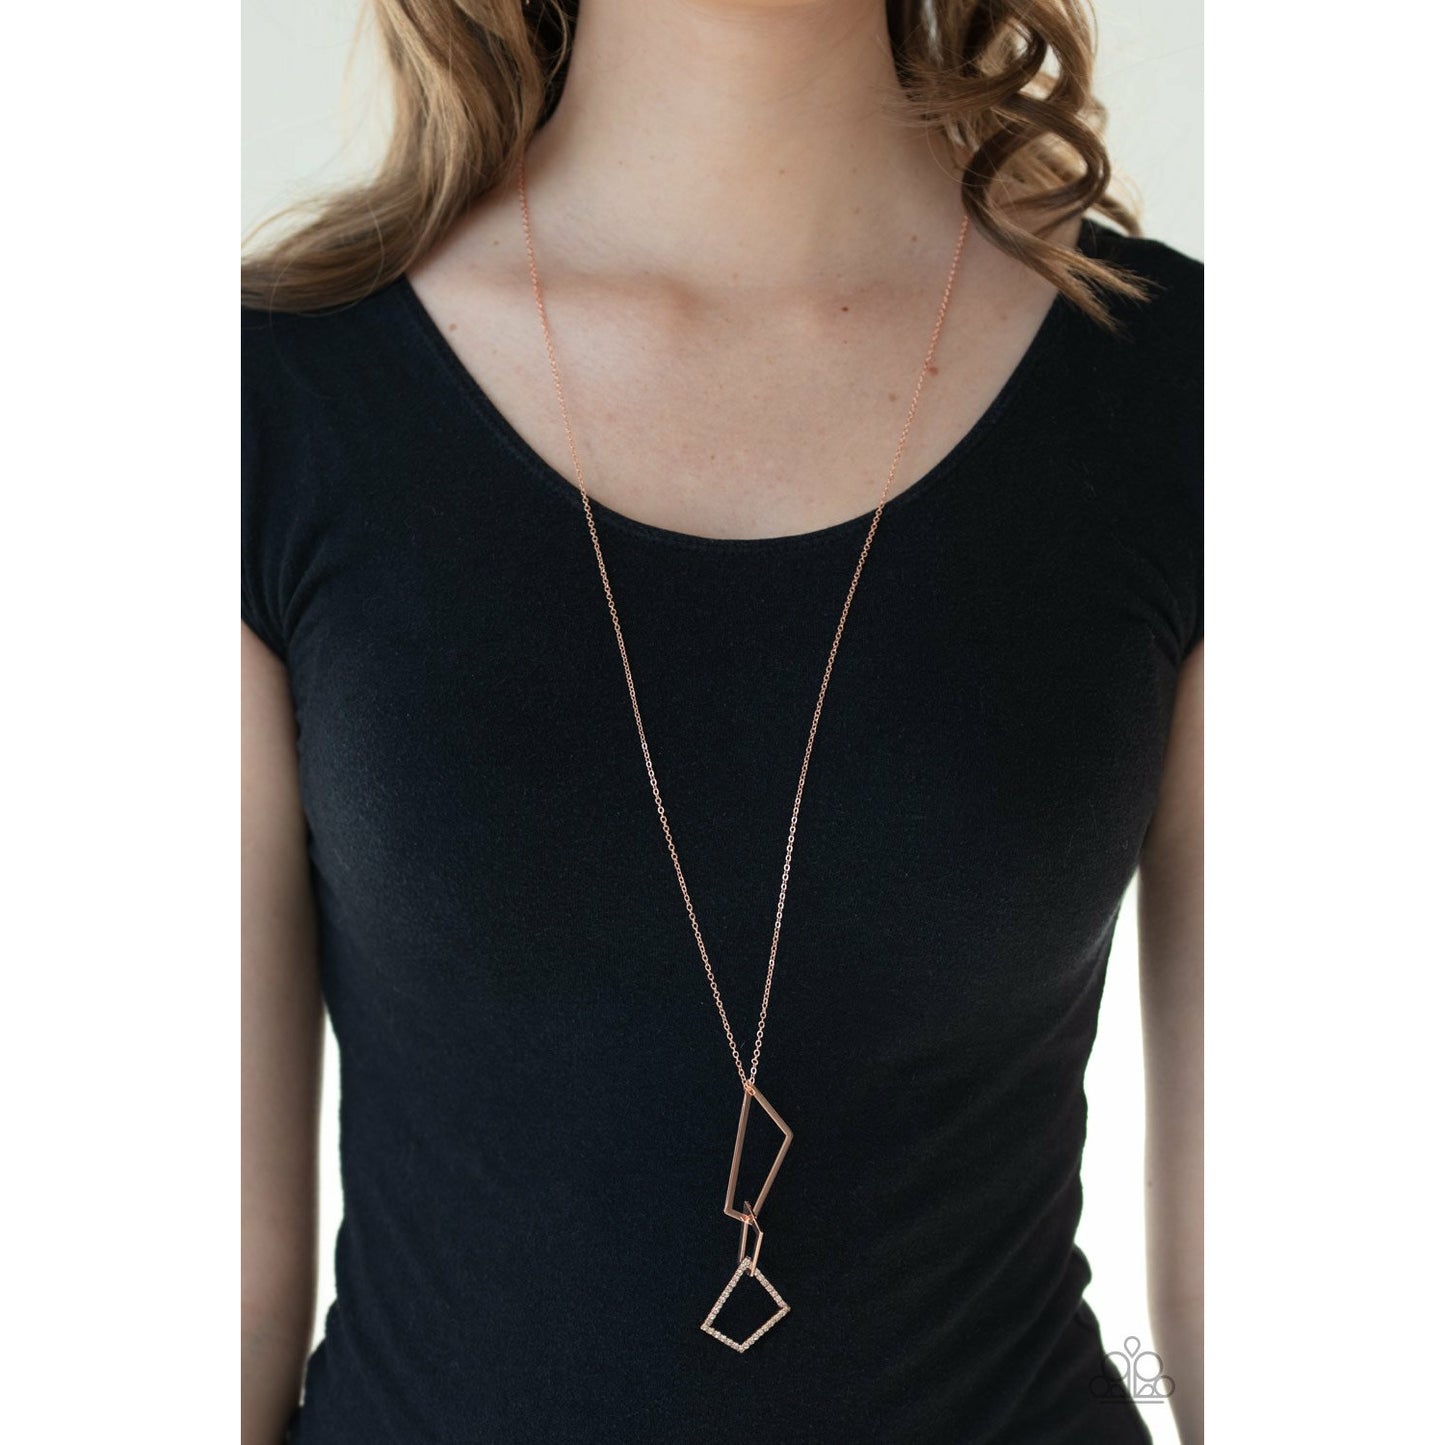 Shapely Silhouettes - Copper necklace